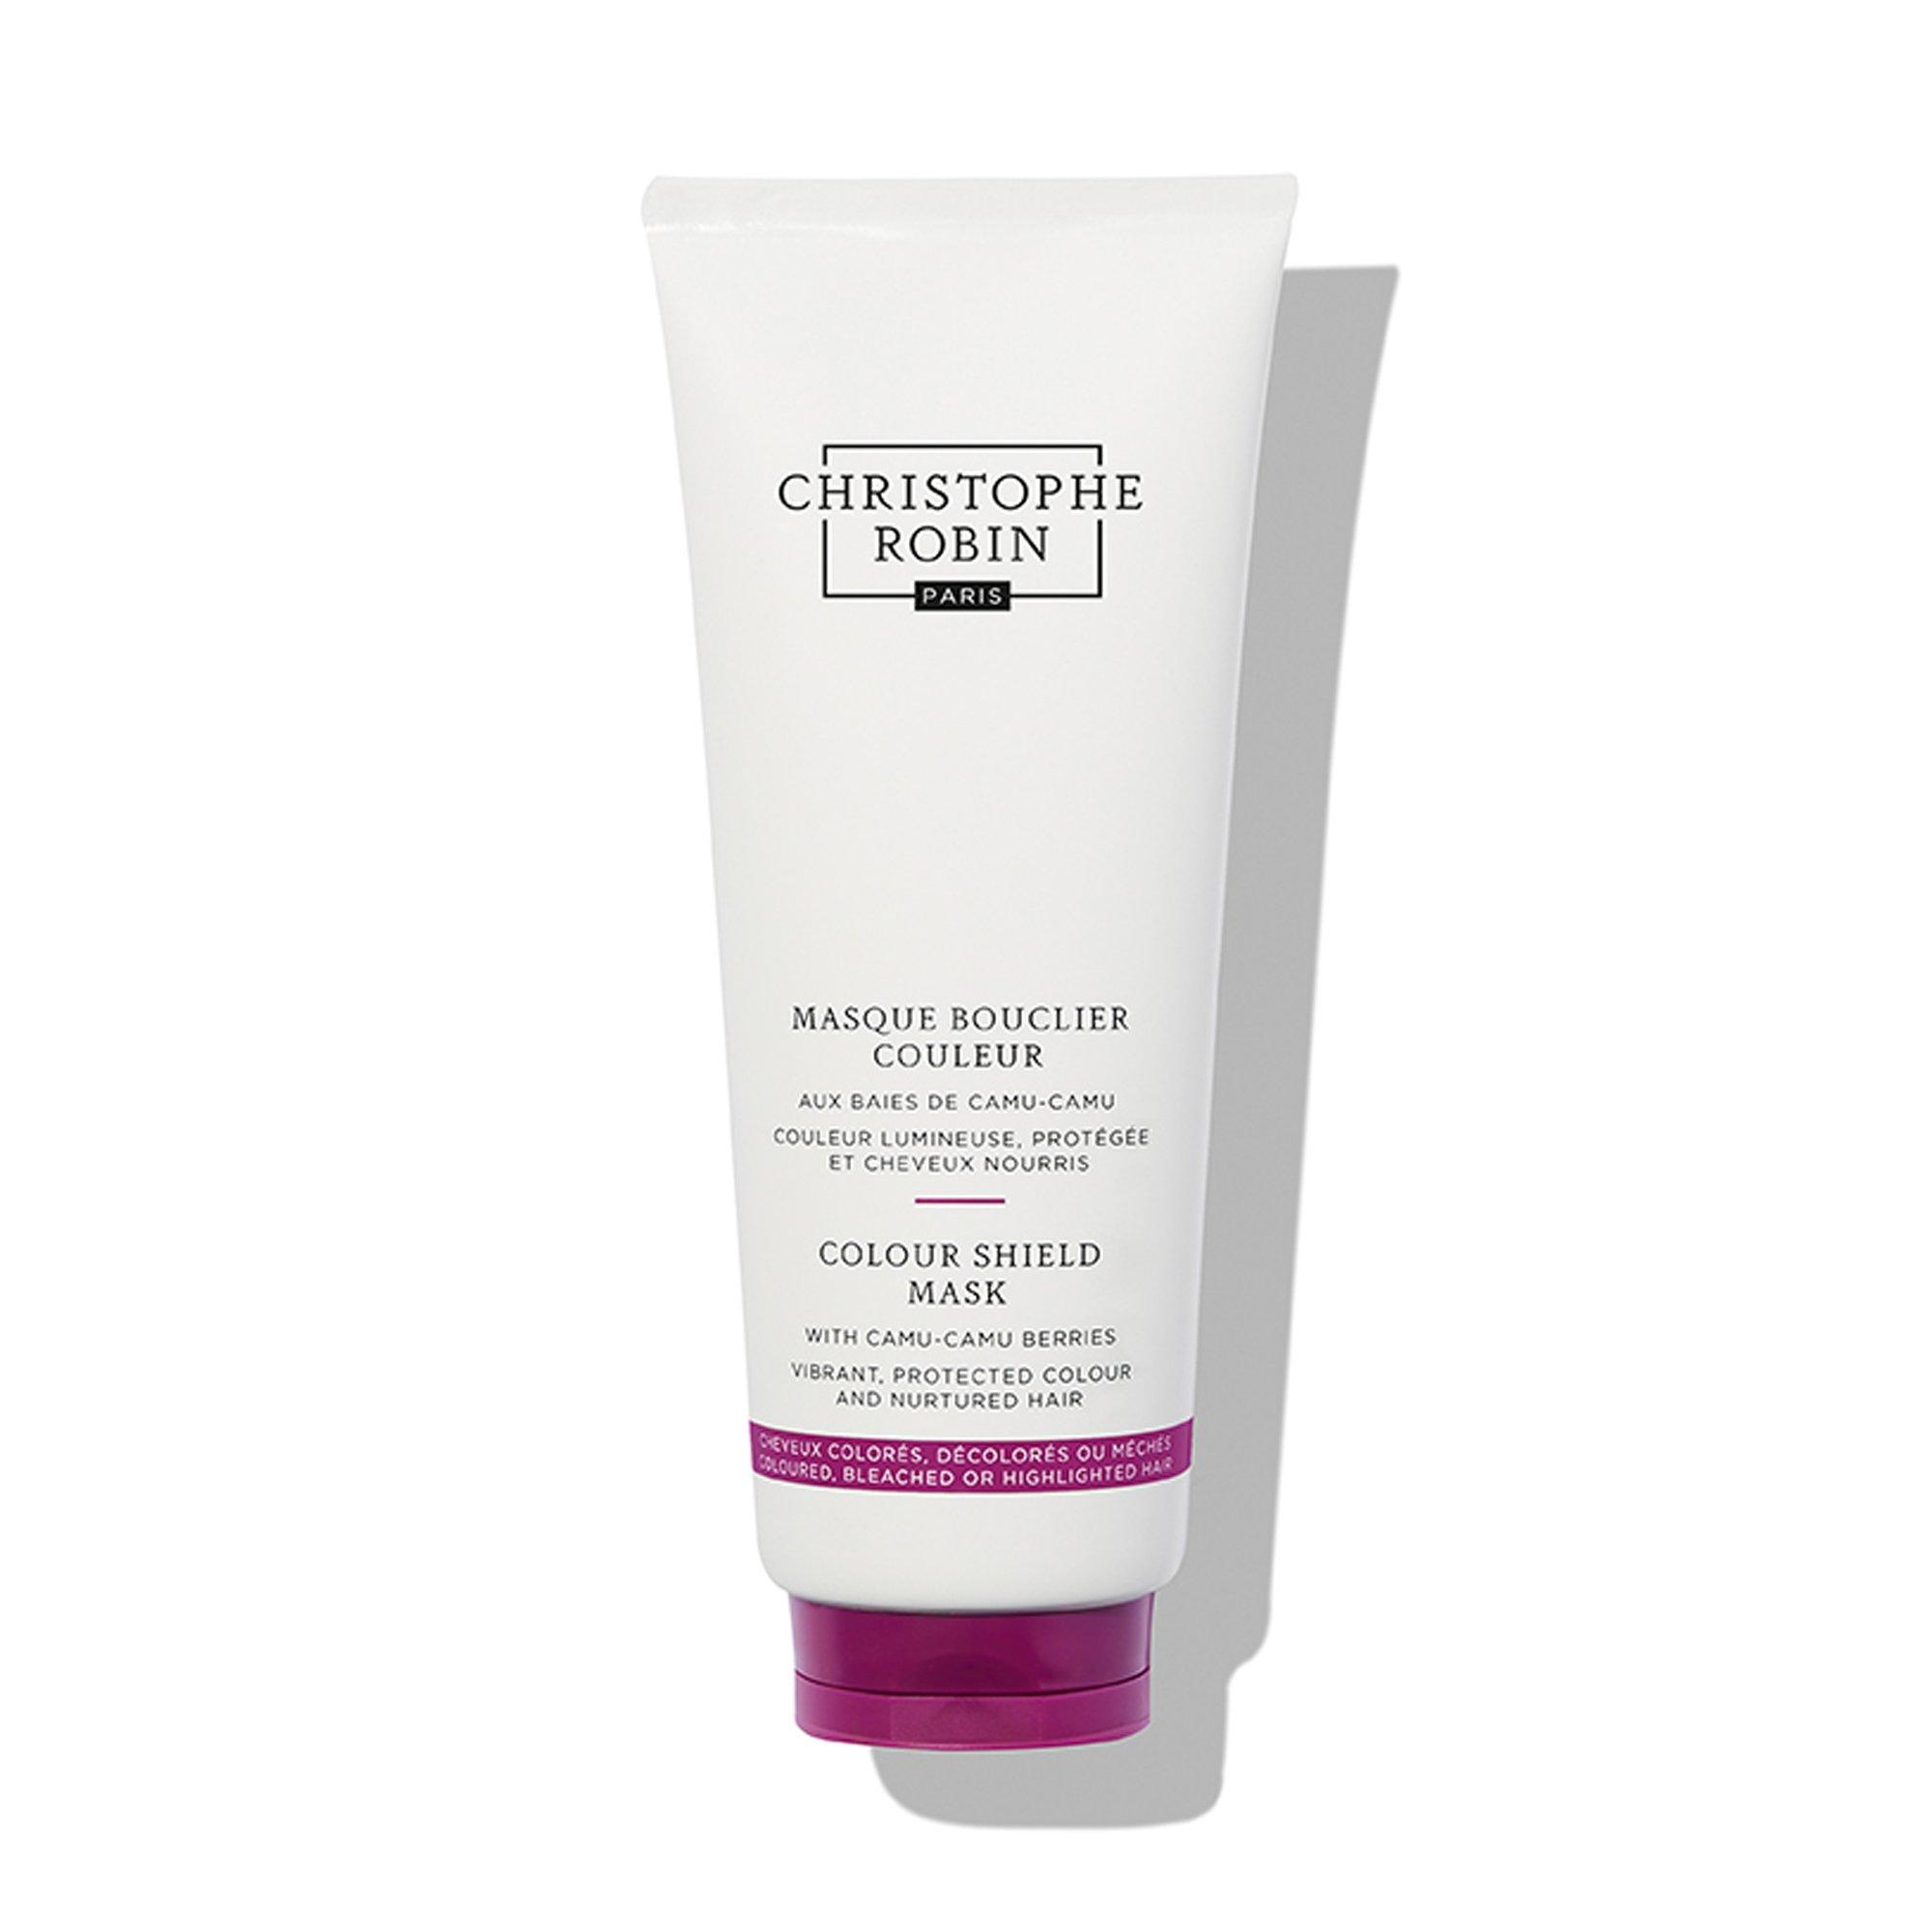 Image of Christophe Robin Colour Shield with Camu-Camu Berries Masque bouclier couleur - 200ml